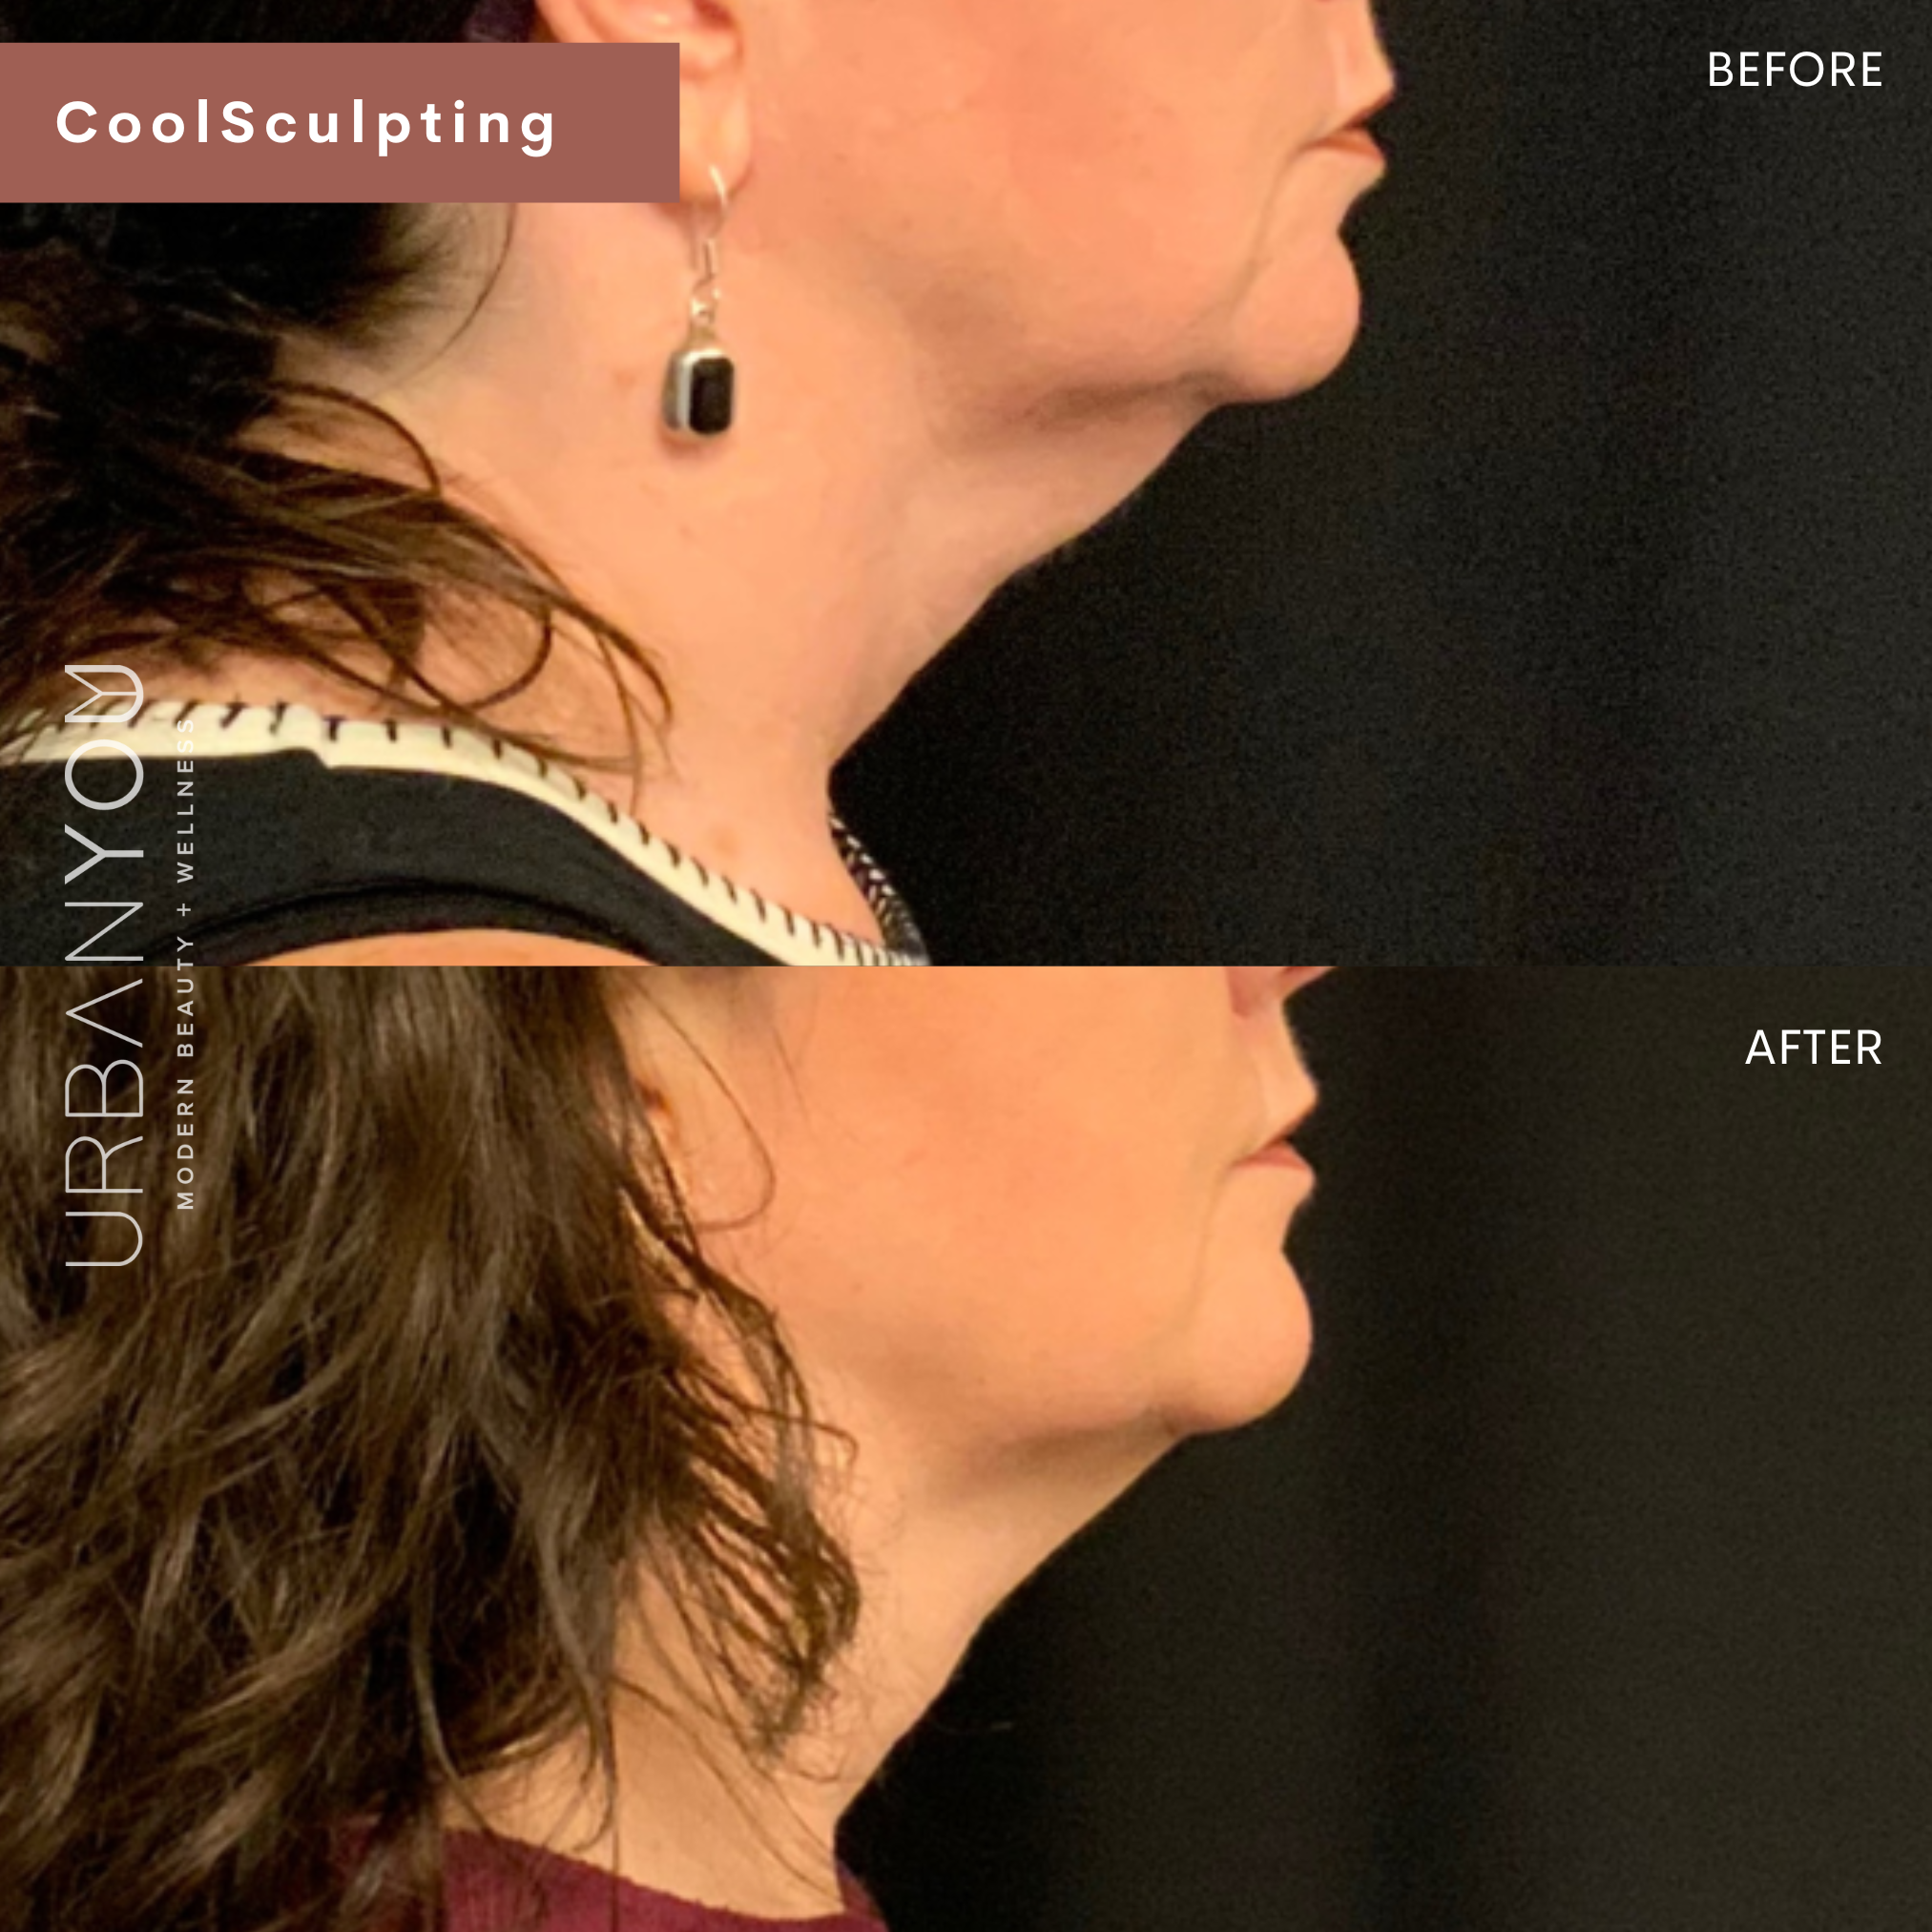 CoolSculpting Before and After Photos at Urban You Medical Spa in Grand Rapids and Northville, Michigan (Copy)